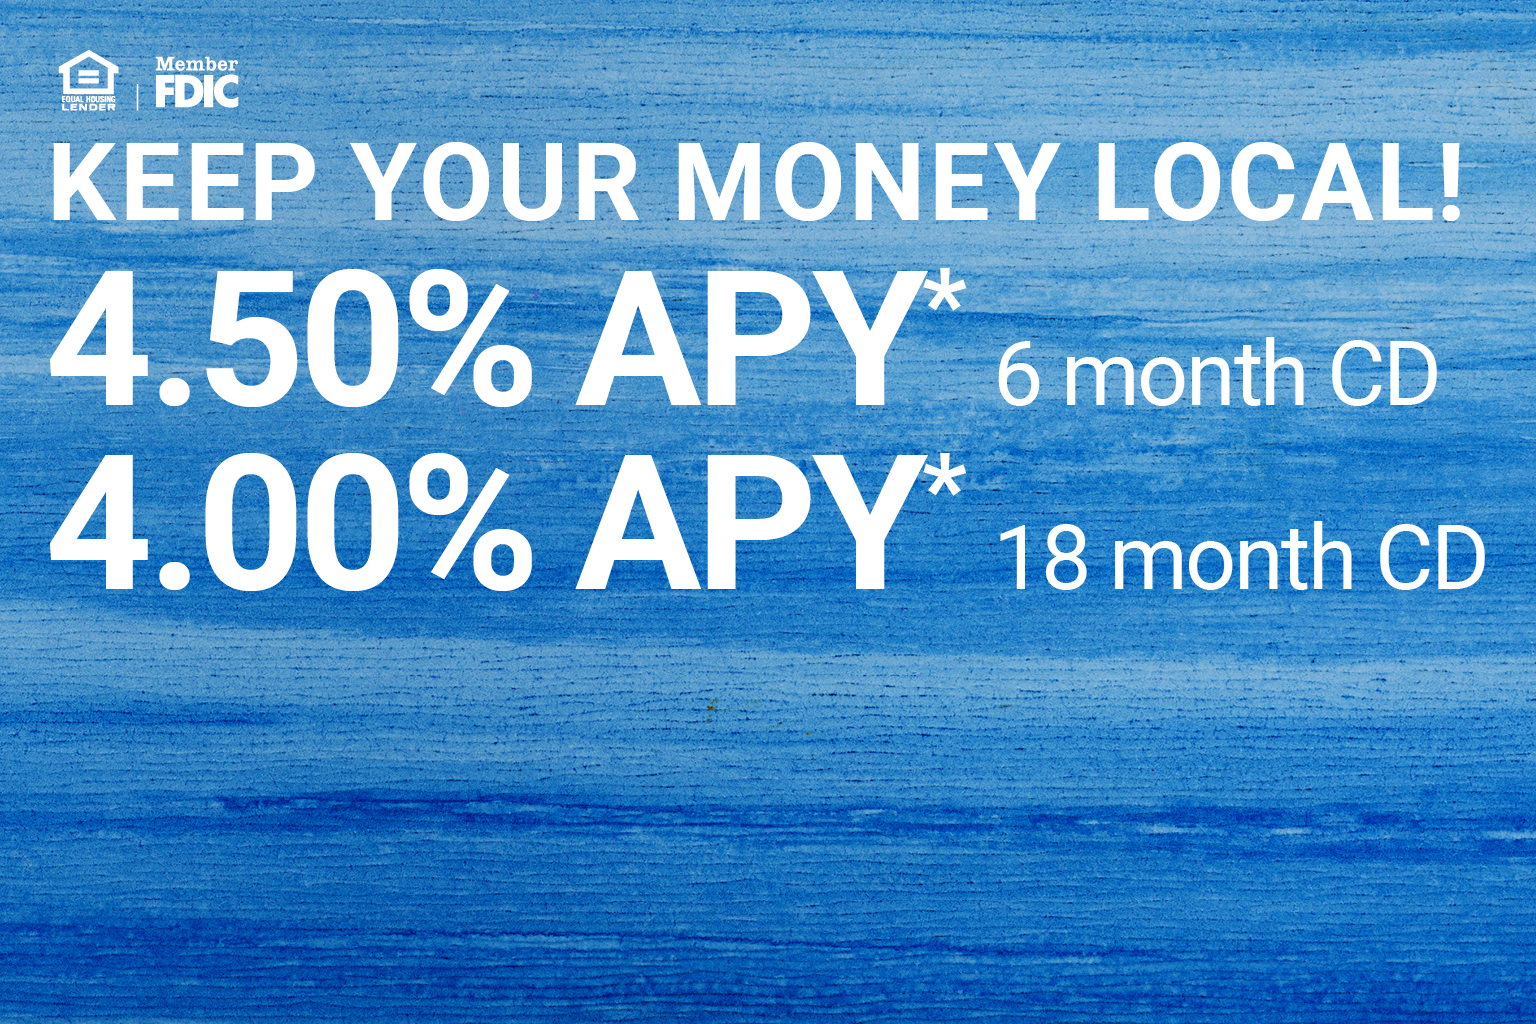 Keep Your Money Local with 4.50% APY* 6 month CD or 4.00% APY* 18 month CD